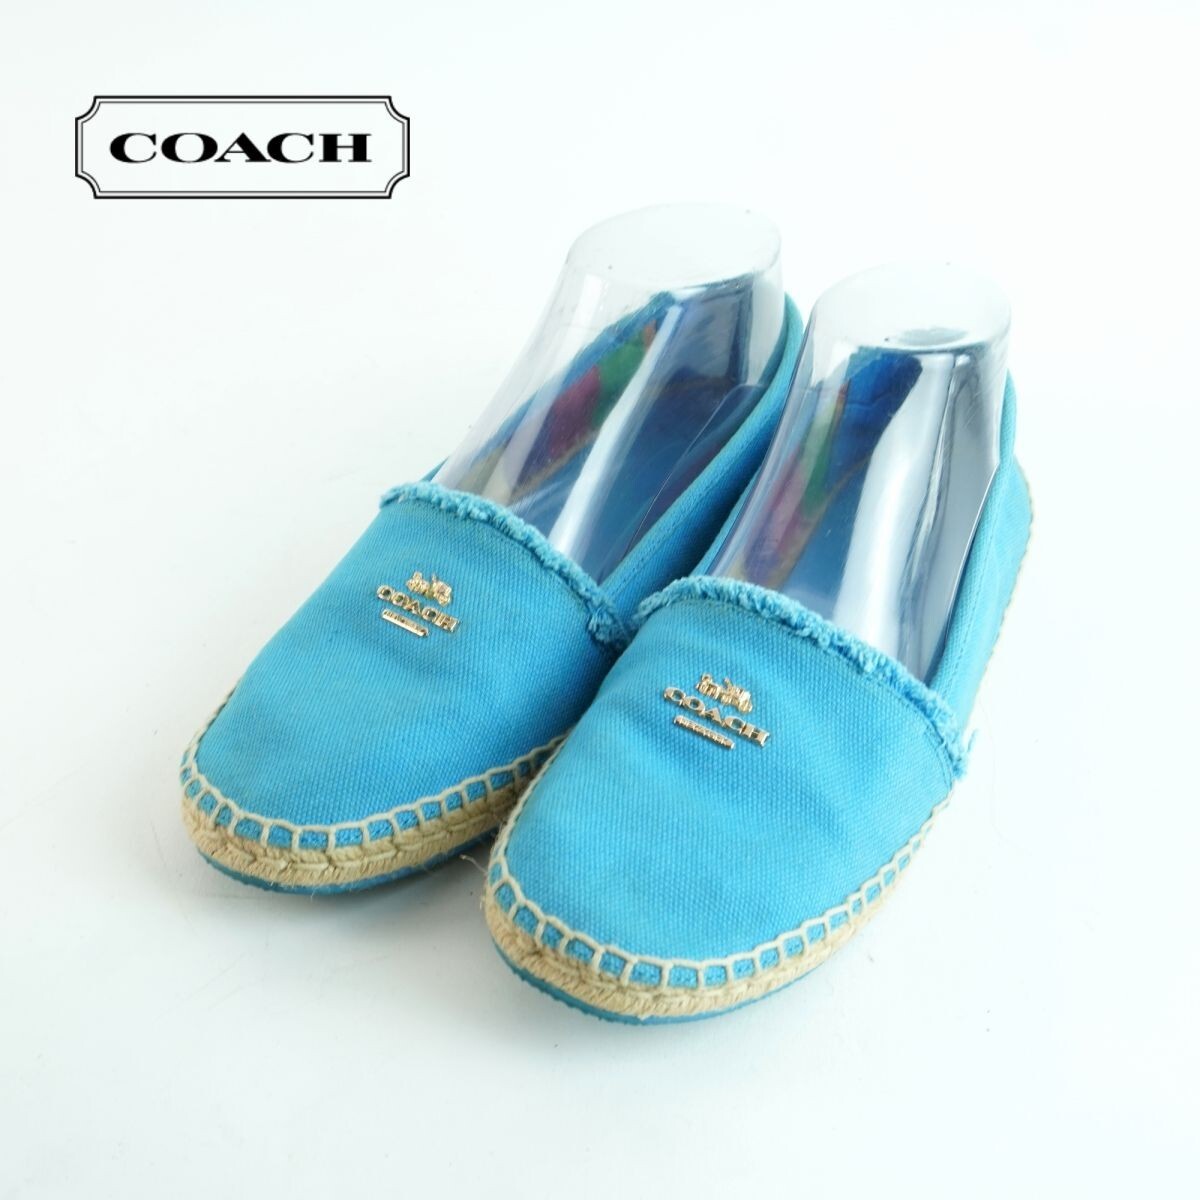 COACH Coach 23.5 slip-on shoes flat shoes brand Logo Gold metal fittings canvas ground blue blue /NC27